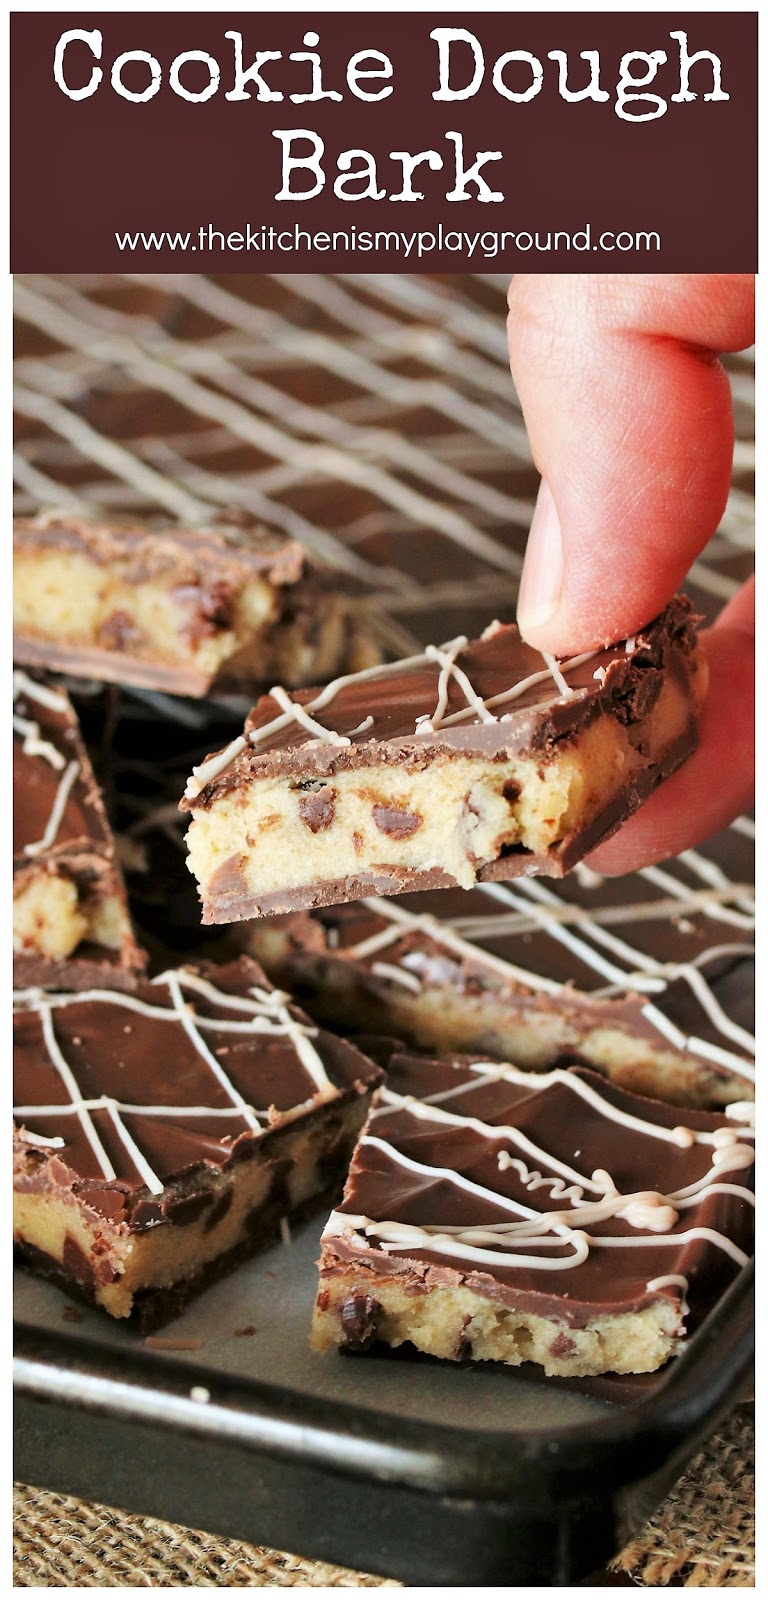 Chocolate Chip Cookie Dough Bark: Step-by-Step | The Kitchen is My ...